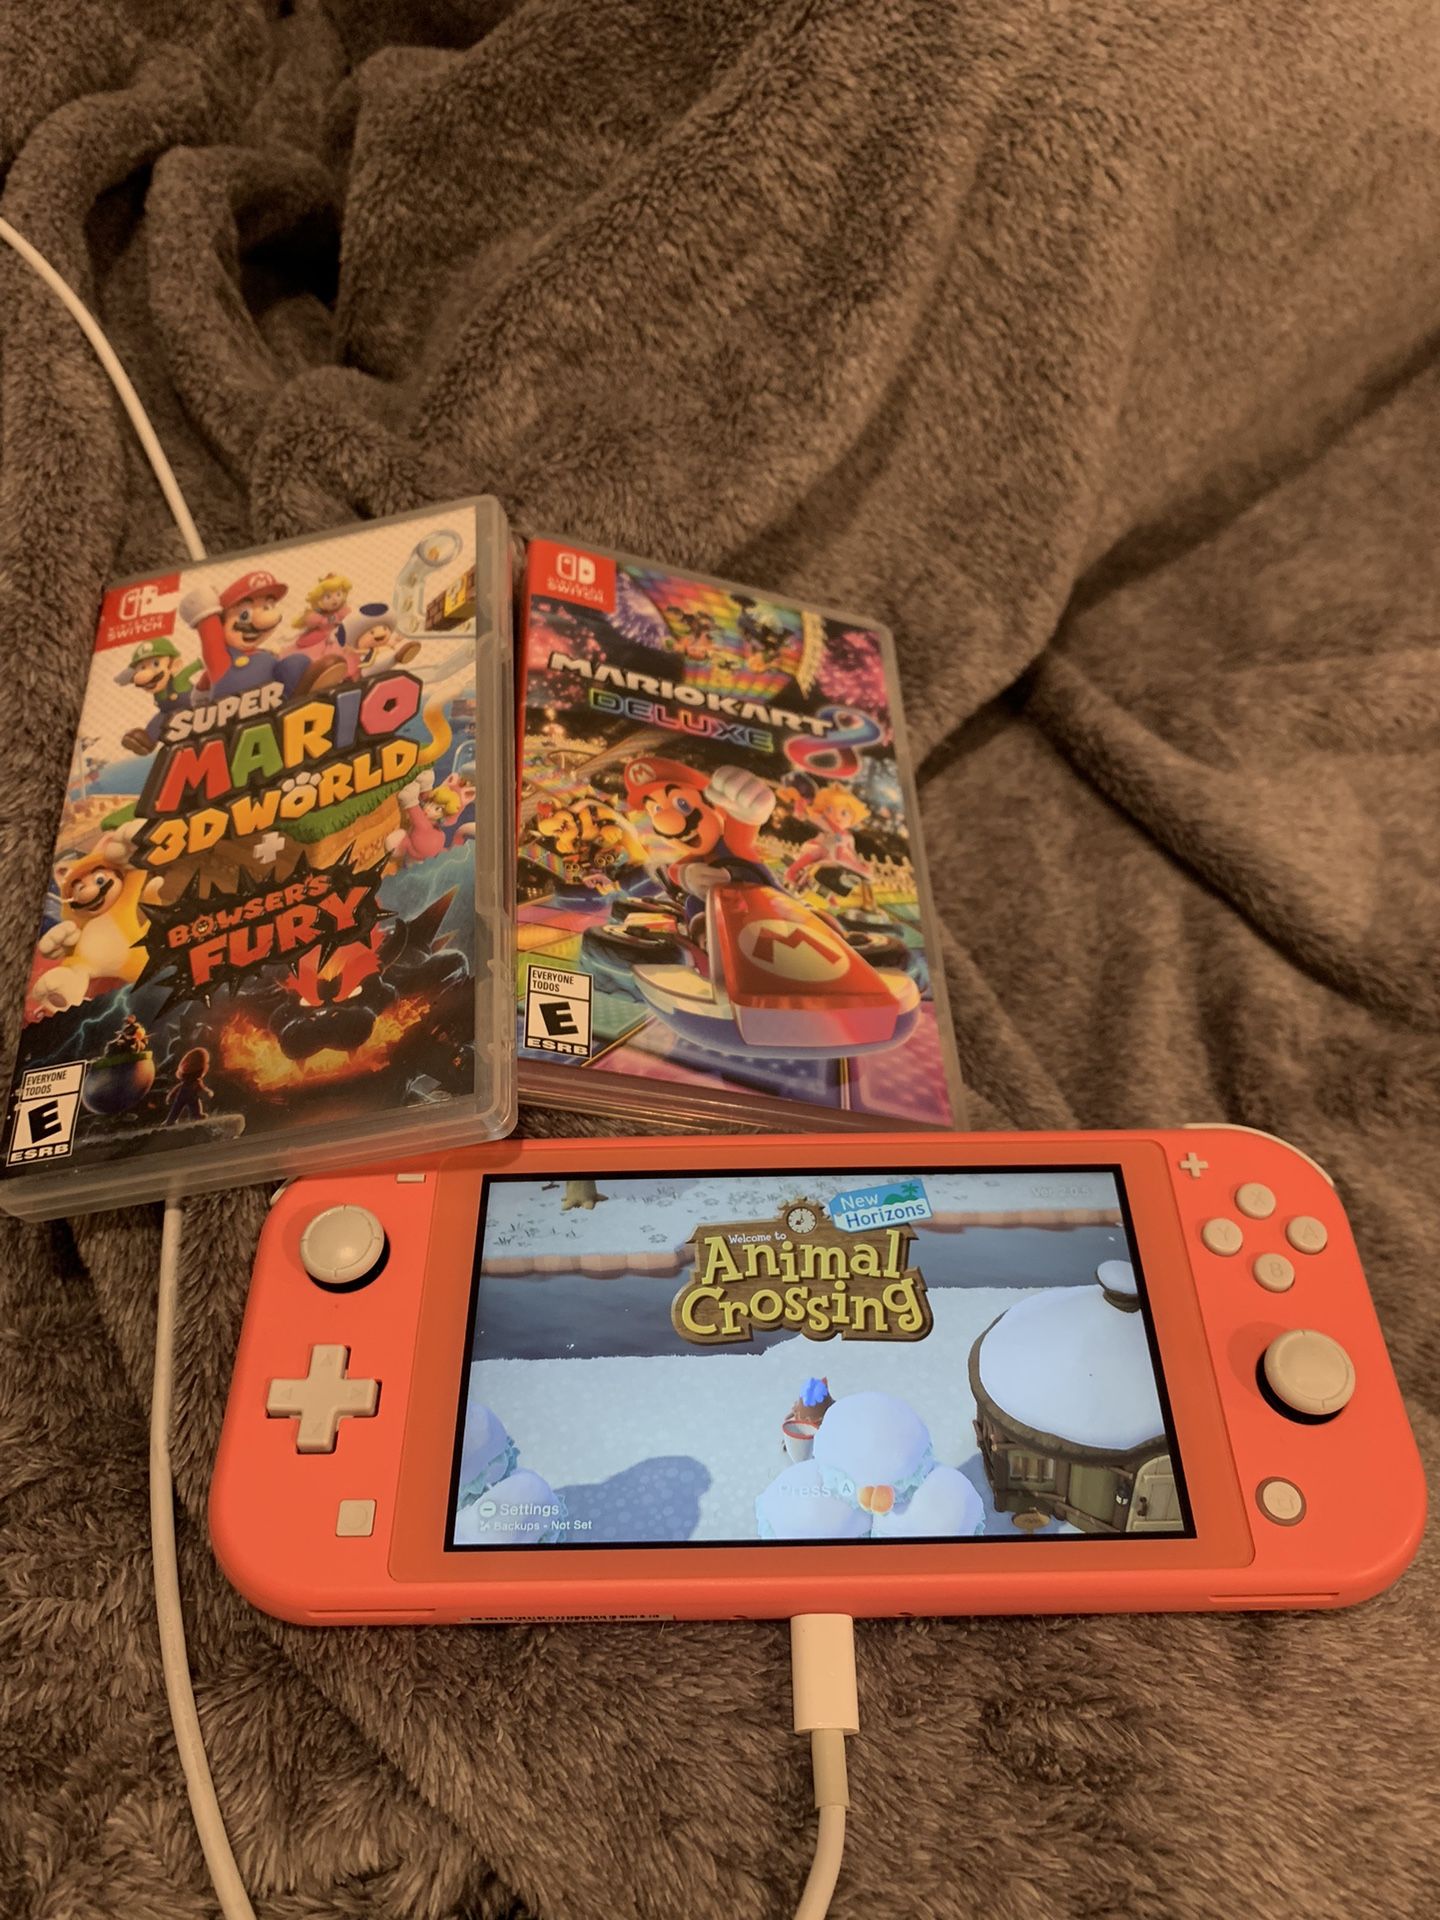 Nintendo Switch With 3 Games- Animal Crossing, Super Mario 3D World, And Mario kart 8 Deluxe